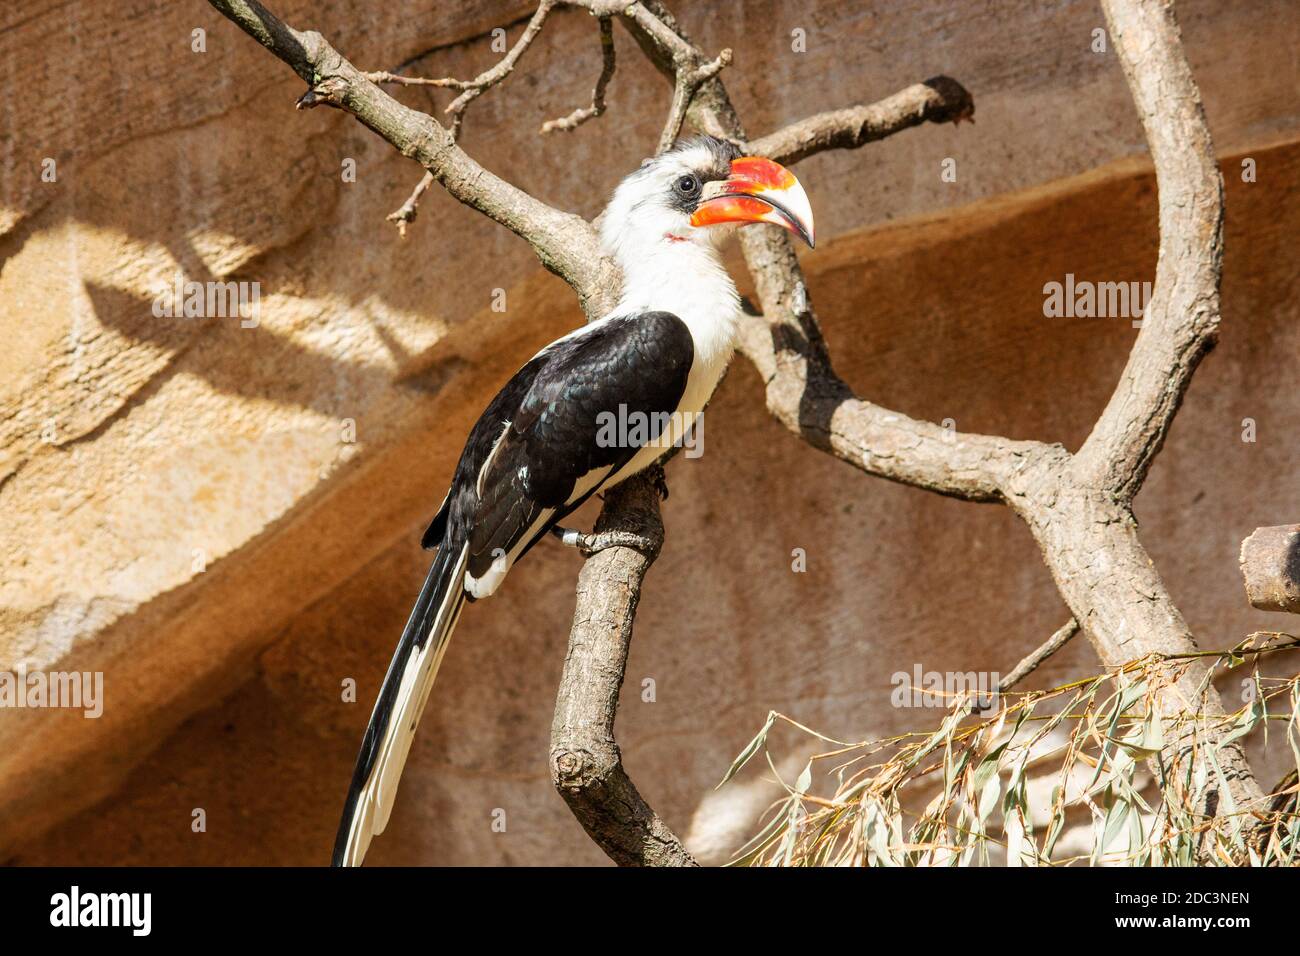 Picture of a Von der Deckens hornbill sitting on a branch, They are a hornbill, Tockusckeni, which occurs in East Africa Stock Photo